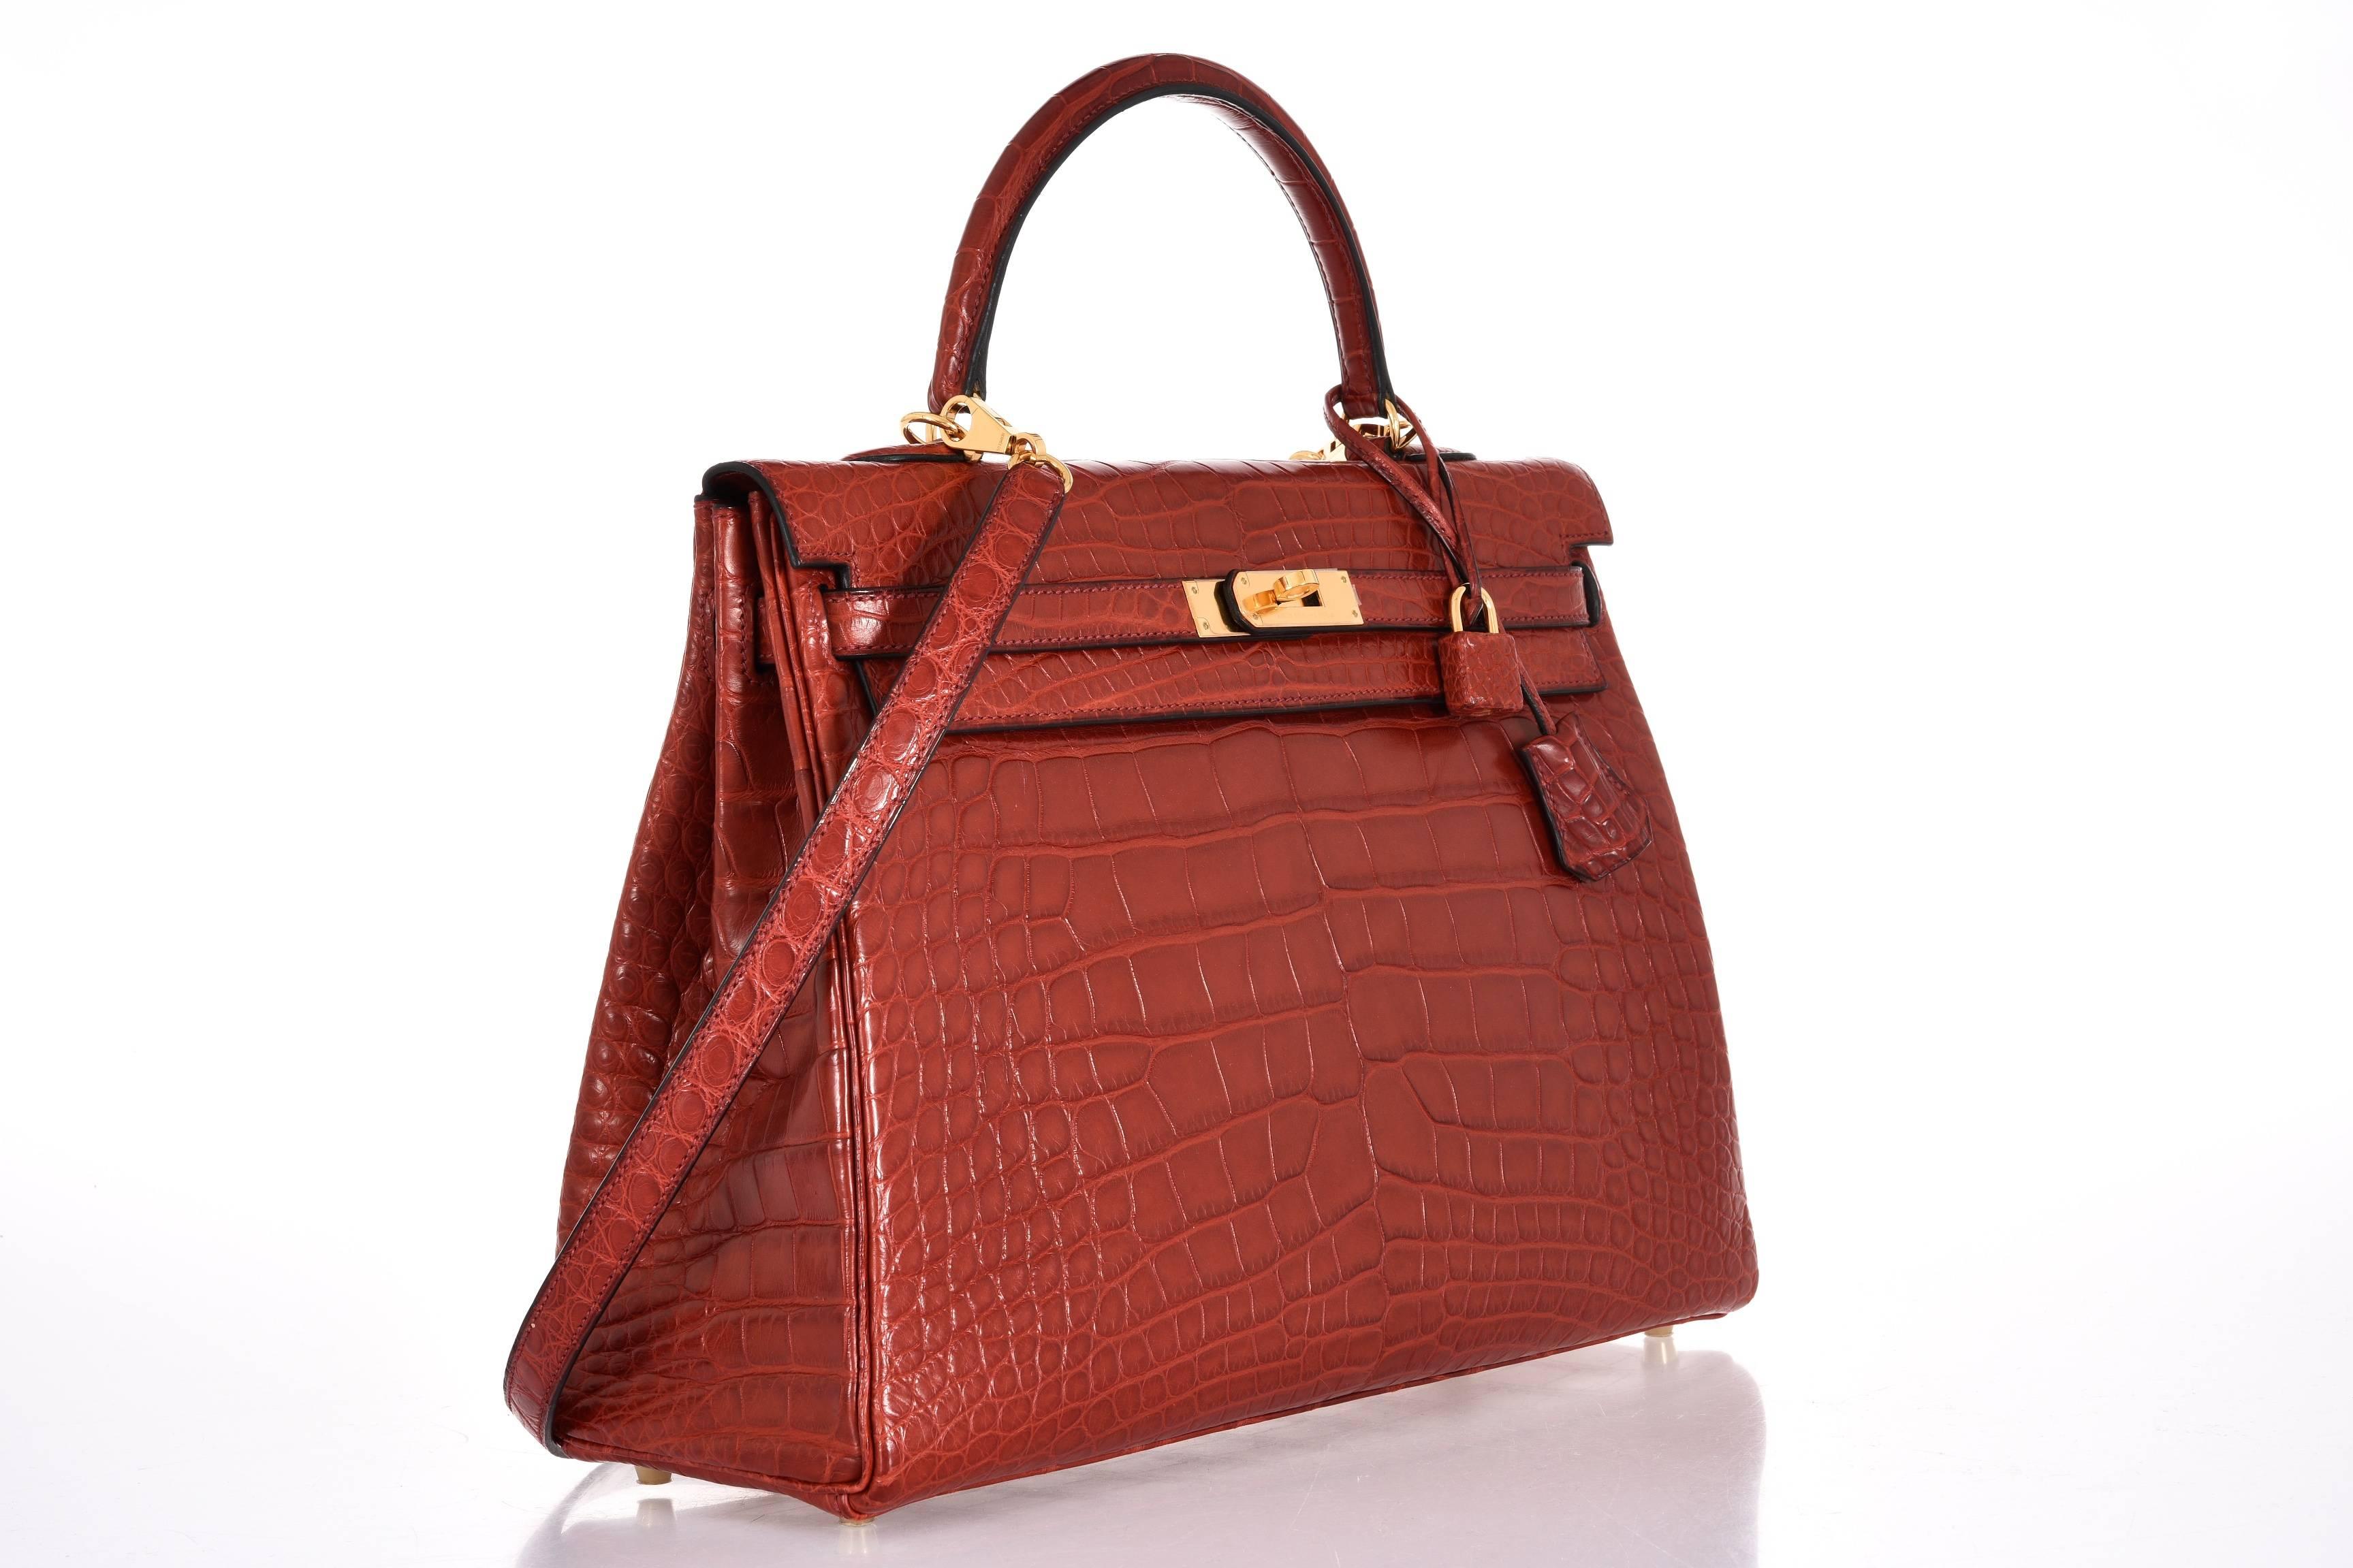 This 35cm Retourne Kelly bag by Hermès in Rouge Alligator and features a top handle, shoulder strap, gold hardware, and the signature twist lock closure.
Signature twist lock closure
Stamp: Q Square
Composition: Alligator
Comes with an original